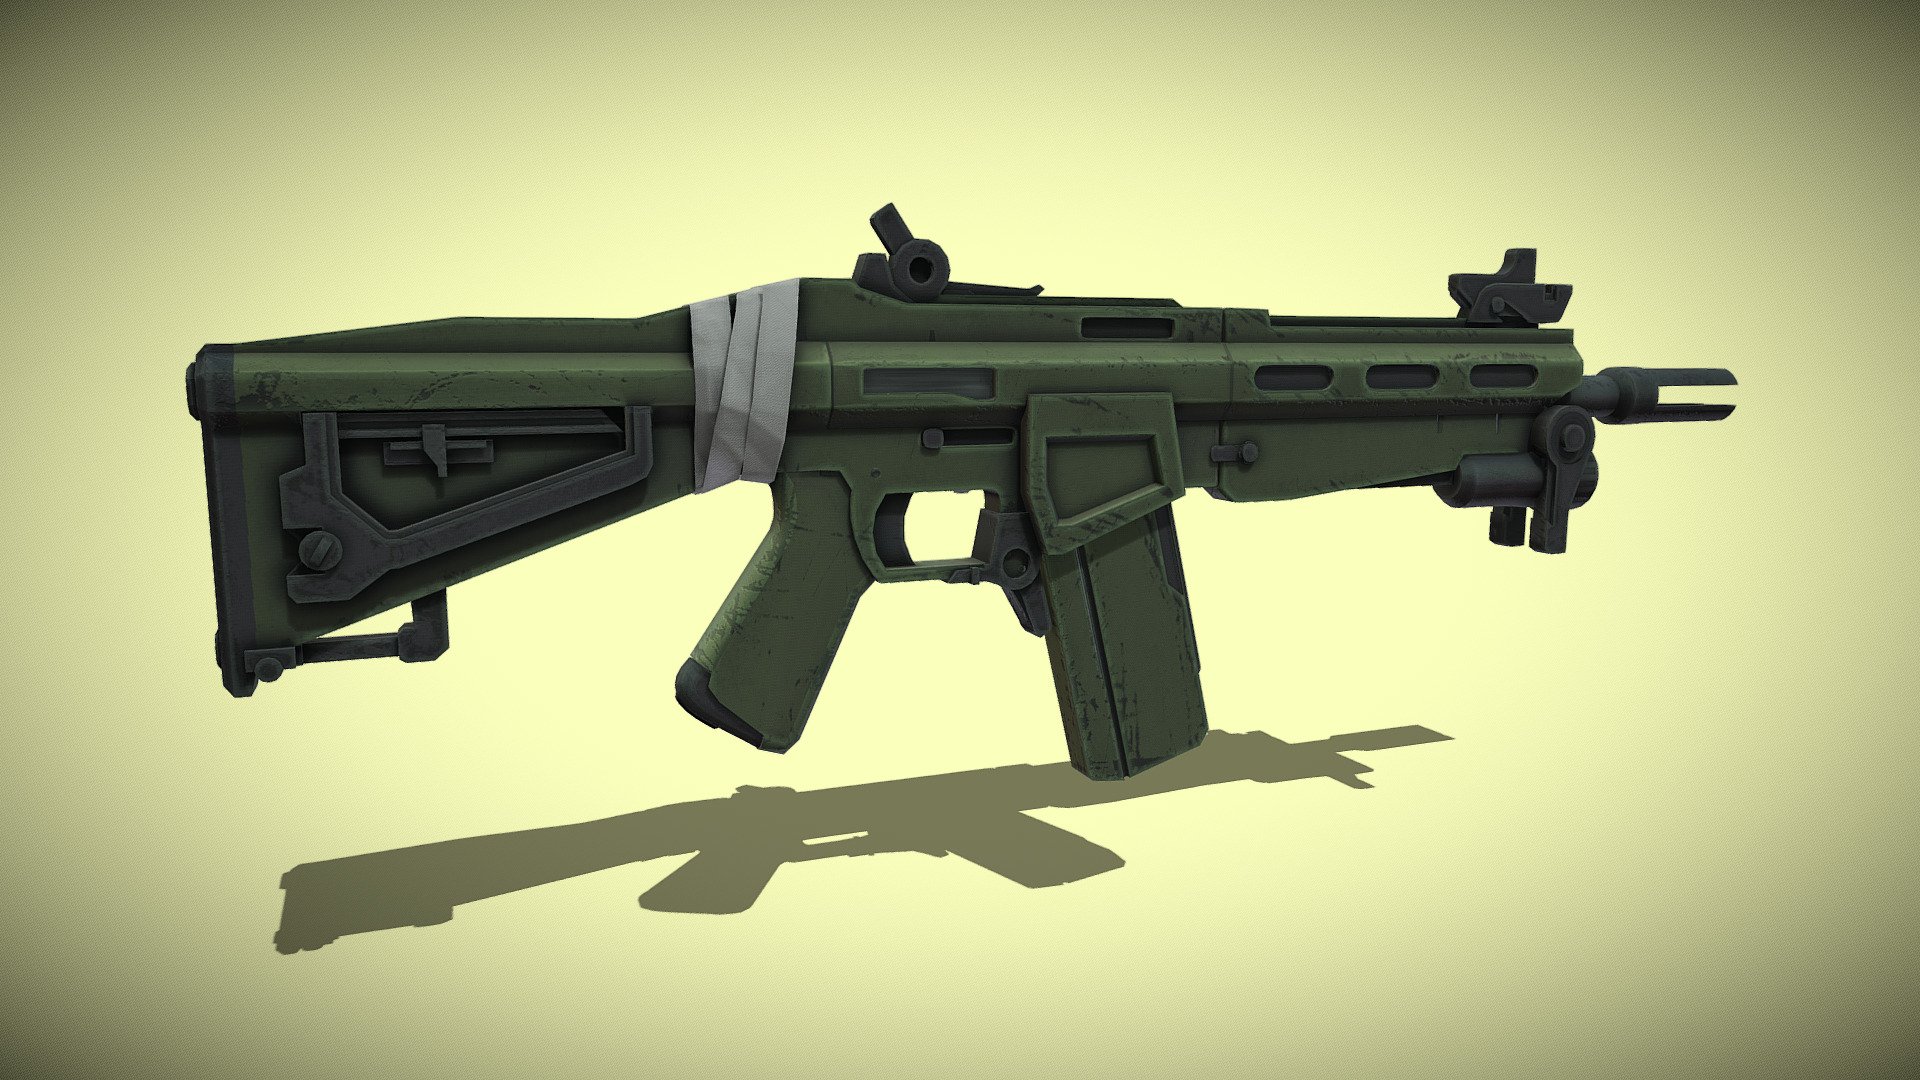 An assault rifle study, following this concept art: https://www.artstation.com/marketplace/p/bXbb/scrap-weapon-concept-pack
Free to use.

See more: https://www.artstation.com/artwork/PeVmBy - Assault Rifle - Scrap Gun - Download Free 3D model by Thomas_Crozelon 3d model